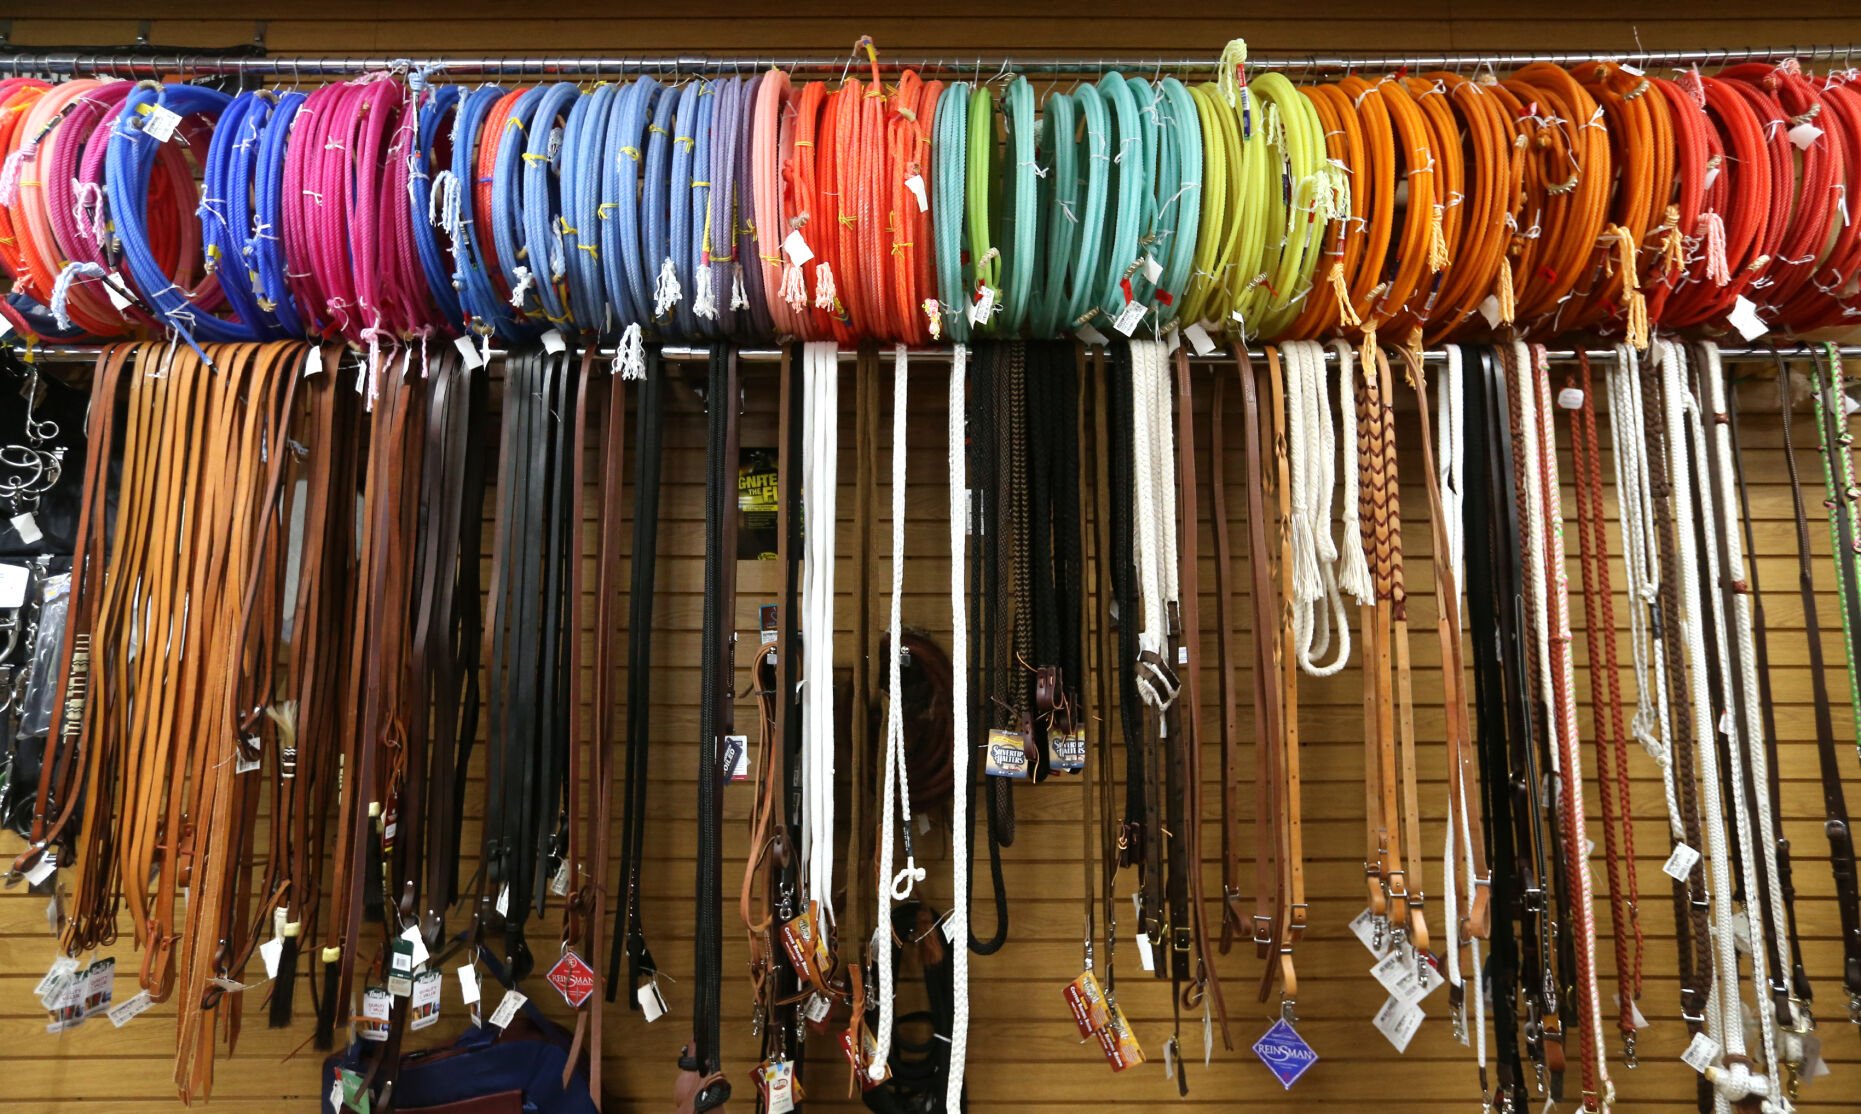 Ropes are displayed at Longhorn Saddlery in Dubuque on Friday, Dec. 30, 2022.    PHOTO CREDIT: JESSICA REILLY